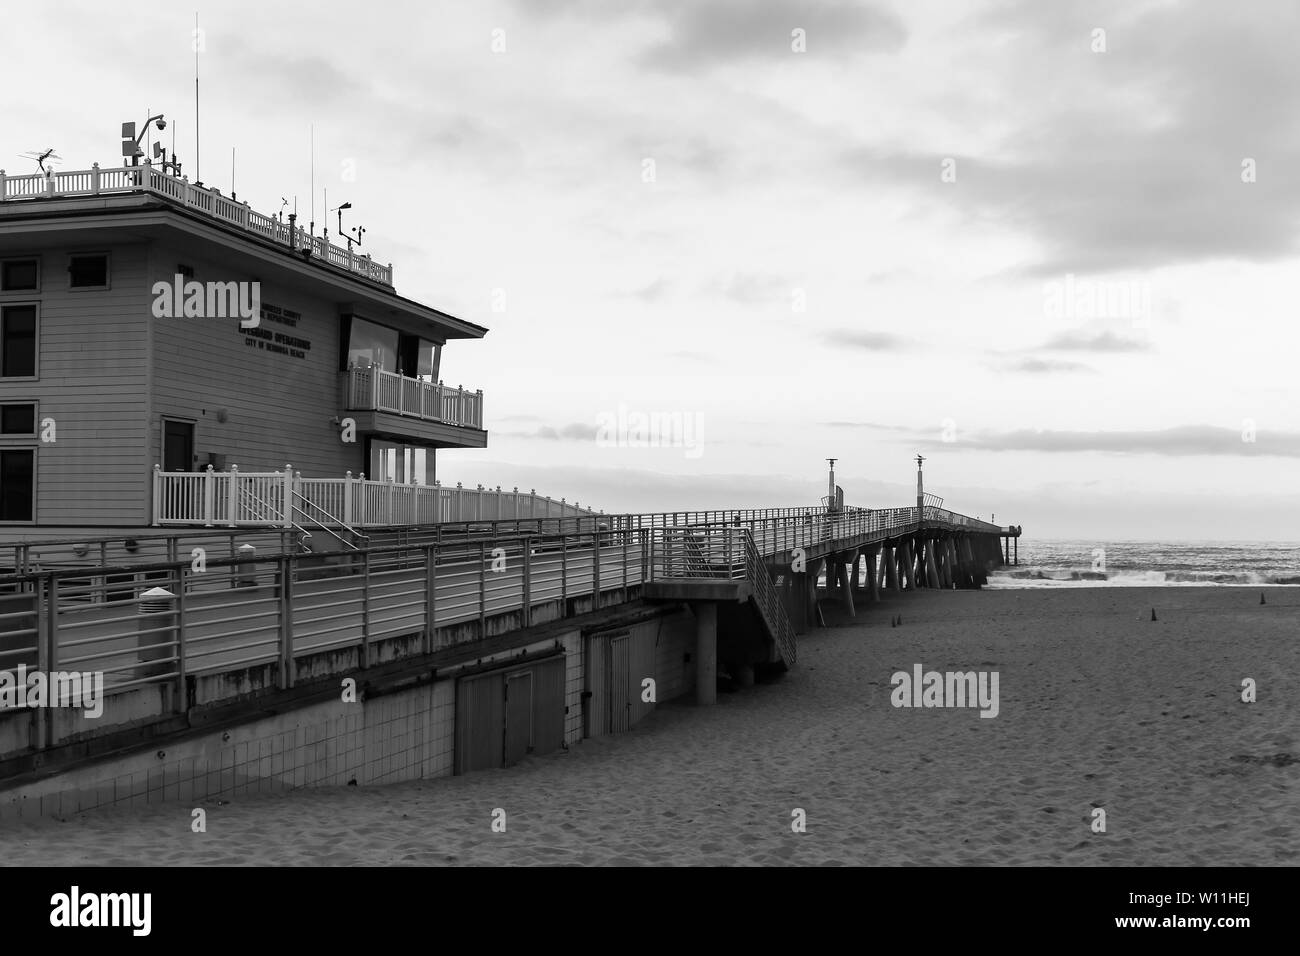 HERMOSA BEACH, USA - MAY 21, 2019: The Lifeguard-Station at the Pier in Hermosa Beach near Los Angeles. Photographed in the morning. Stock Photo